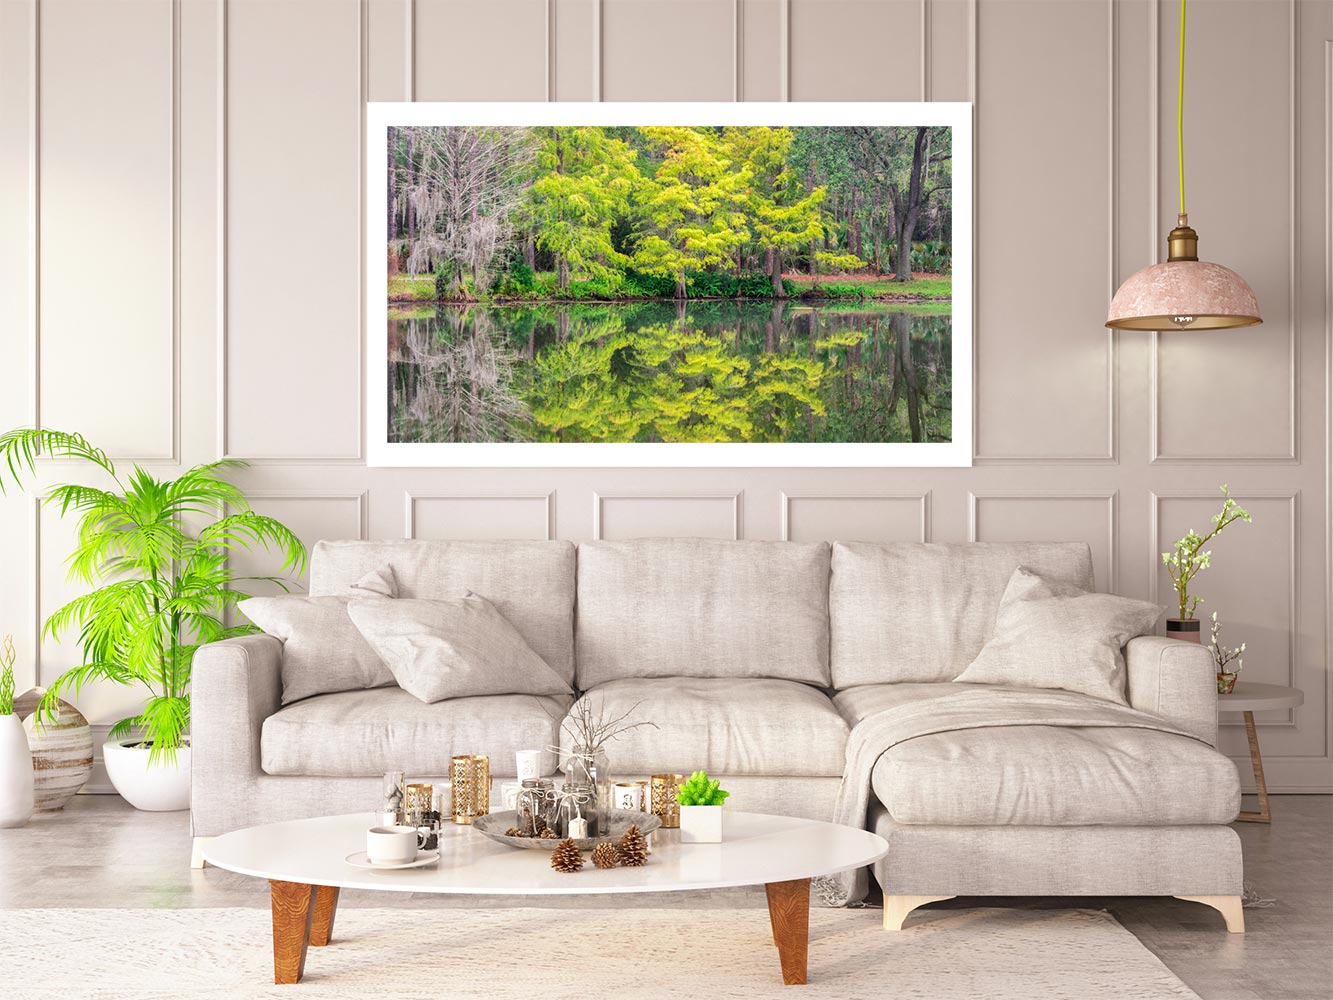 Wall Mockup of Reflective Calm – a Landscape Fine Art Photograph lakeside in a North Pinalls County Park by Brian Jones of 1350 West LLC